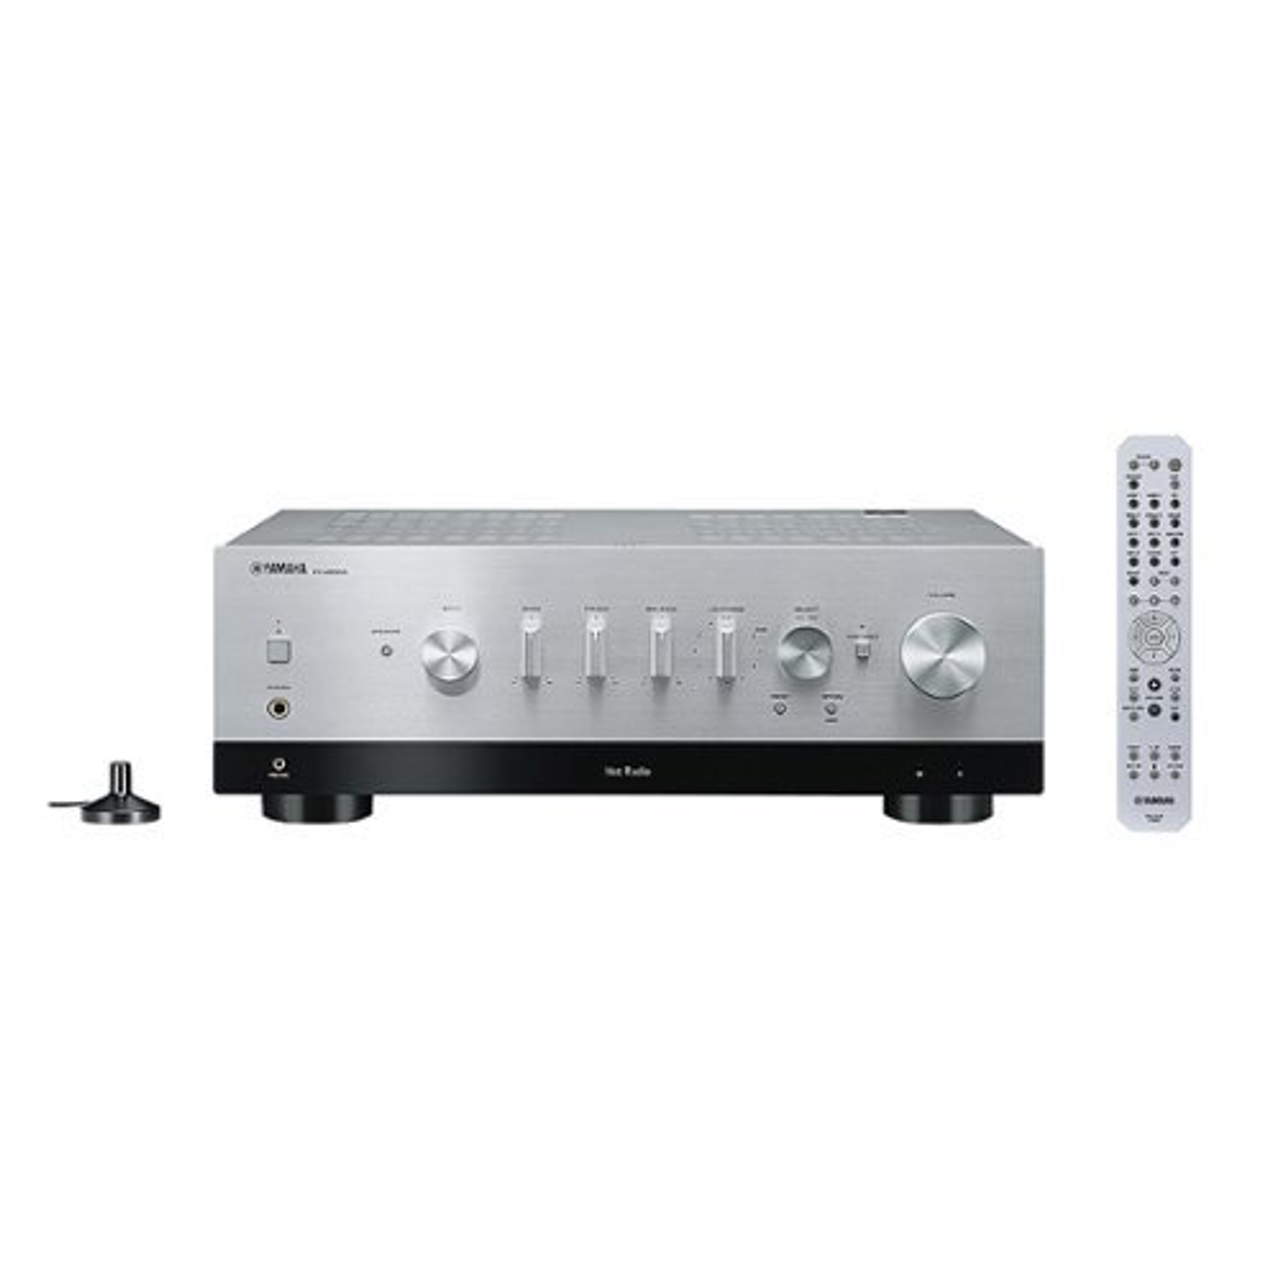 Yamaha - Bluetooth 240-Watt-Continuous-Power 2.0-Channel Network Stereo Receiver with Remote, R-N800A - Silver